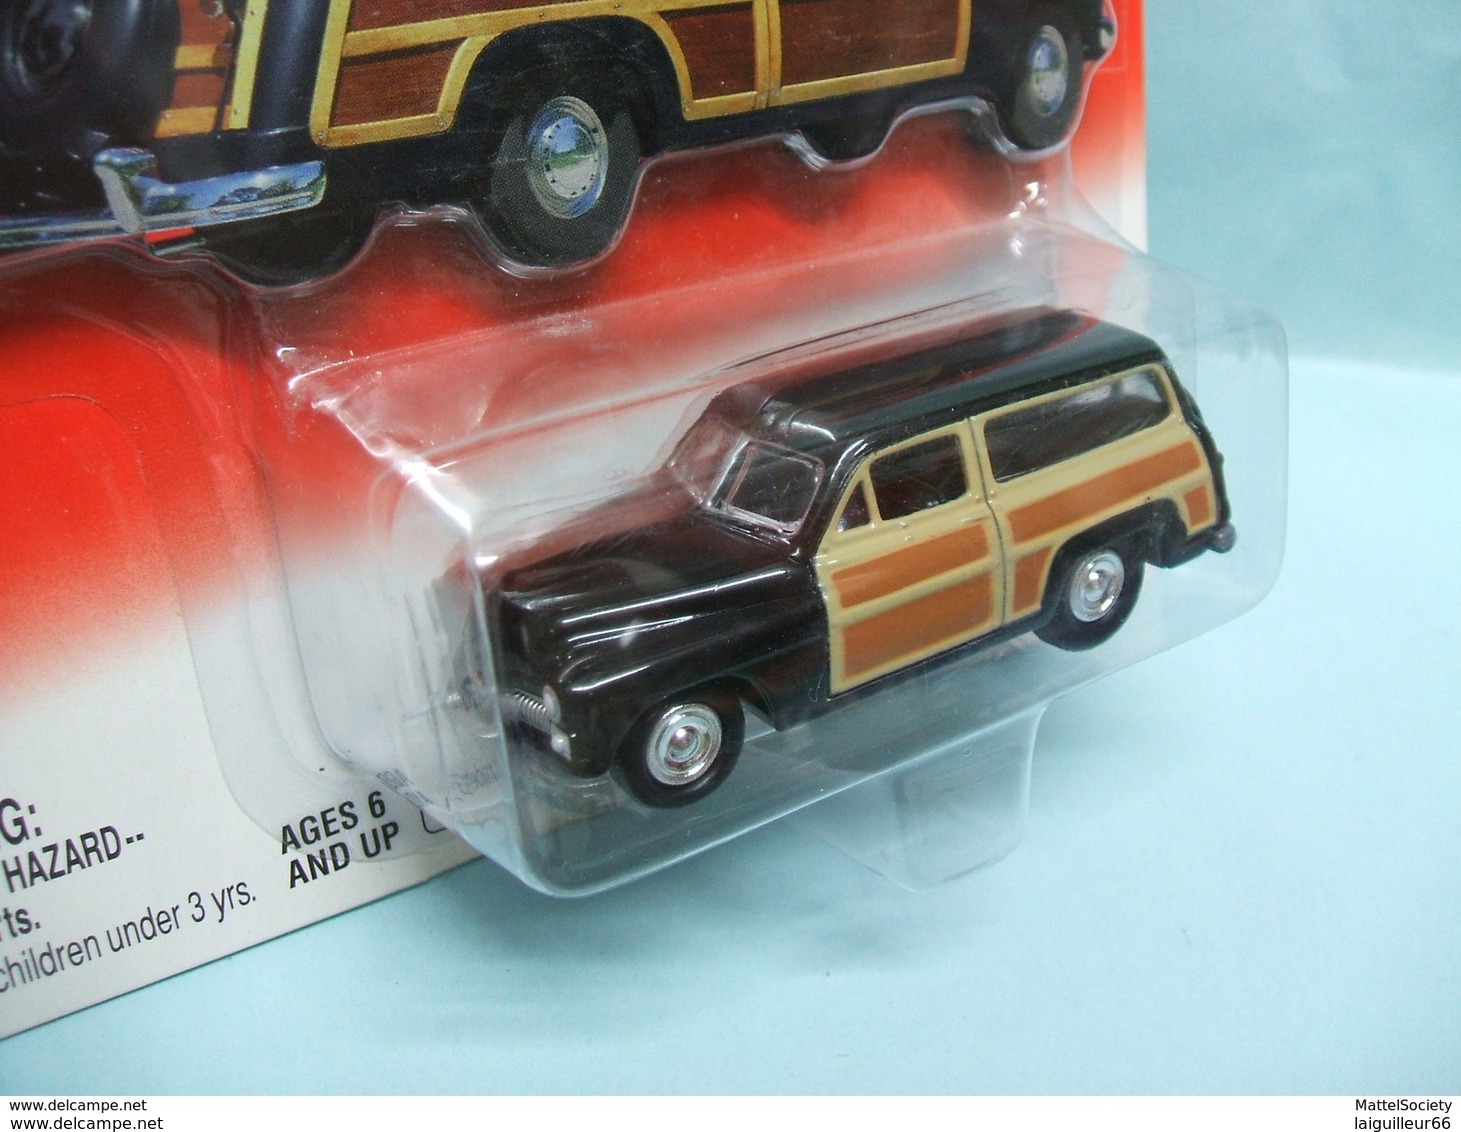 Johnny Lightning - FORD WAGON THE MOD SQUAD WOODY - 2001 Hollywood On Wheels 1/64 - Autres & Non Classés